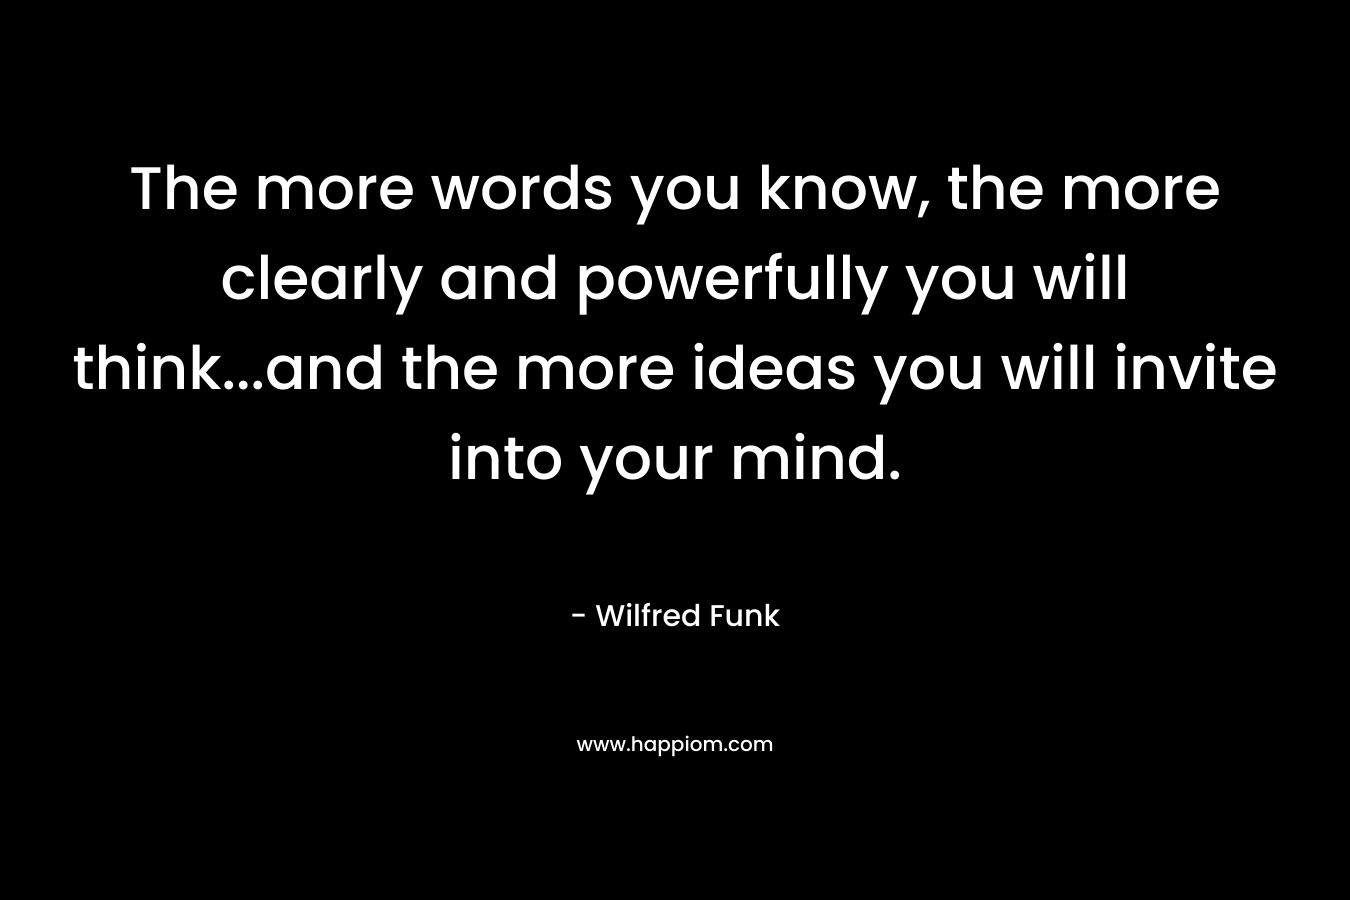 The more words you know, the more clearly and powerfully you will think...and the more ideas you will invite into your mind.